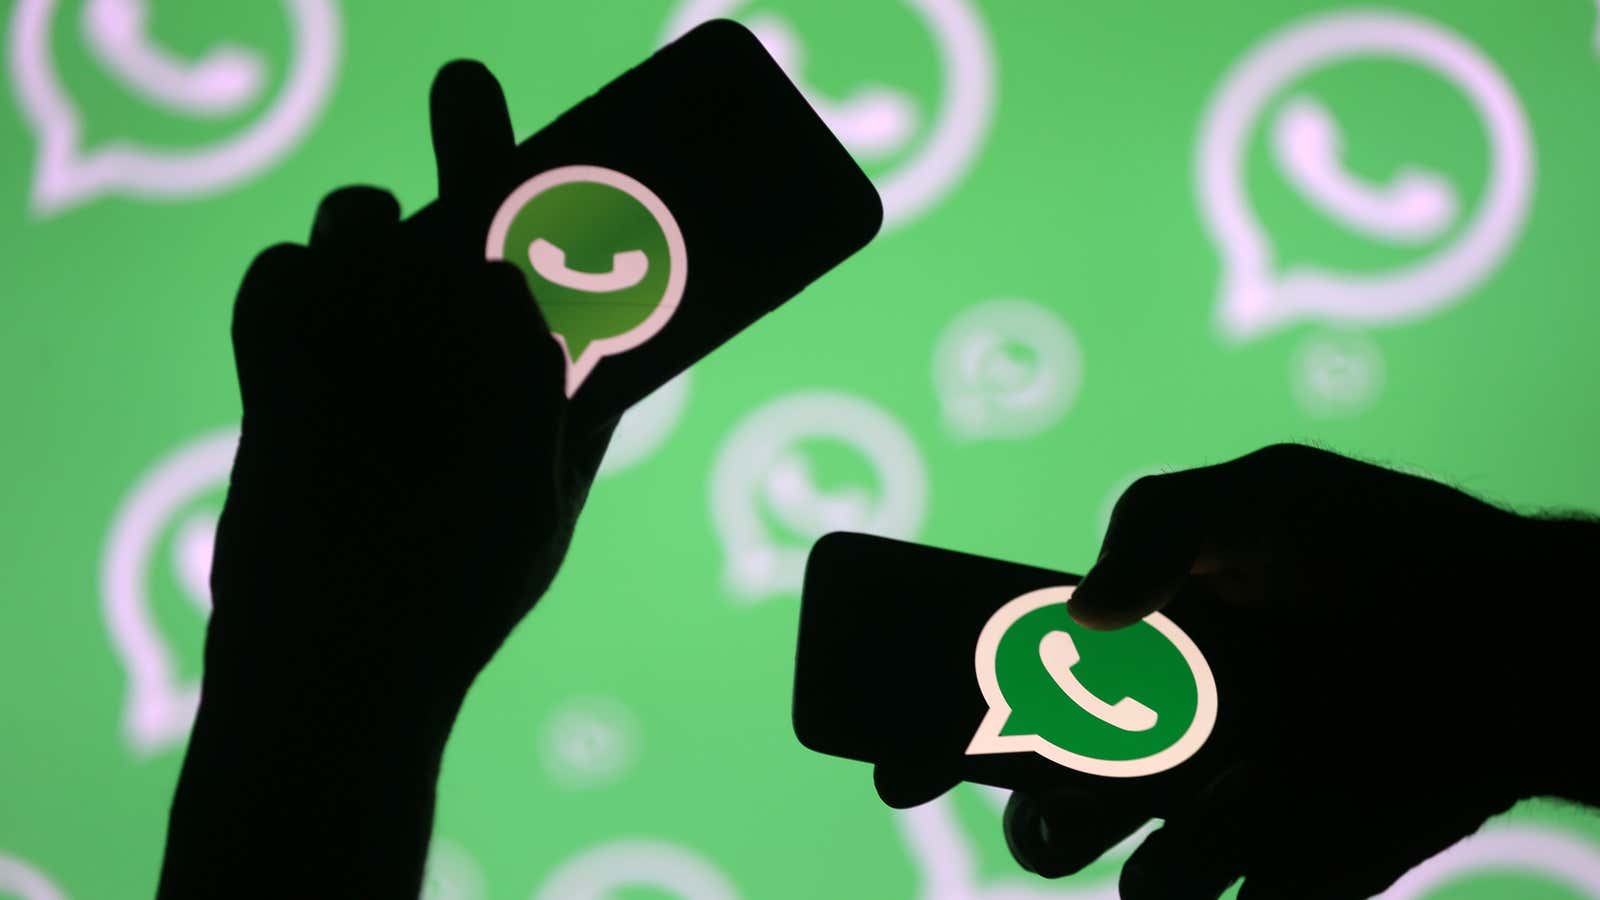 Want to manipulate Whatsapp and Twitter? In India, there’s an app for that.